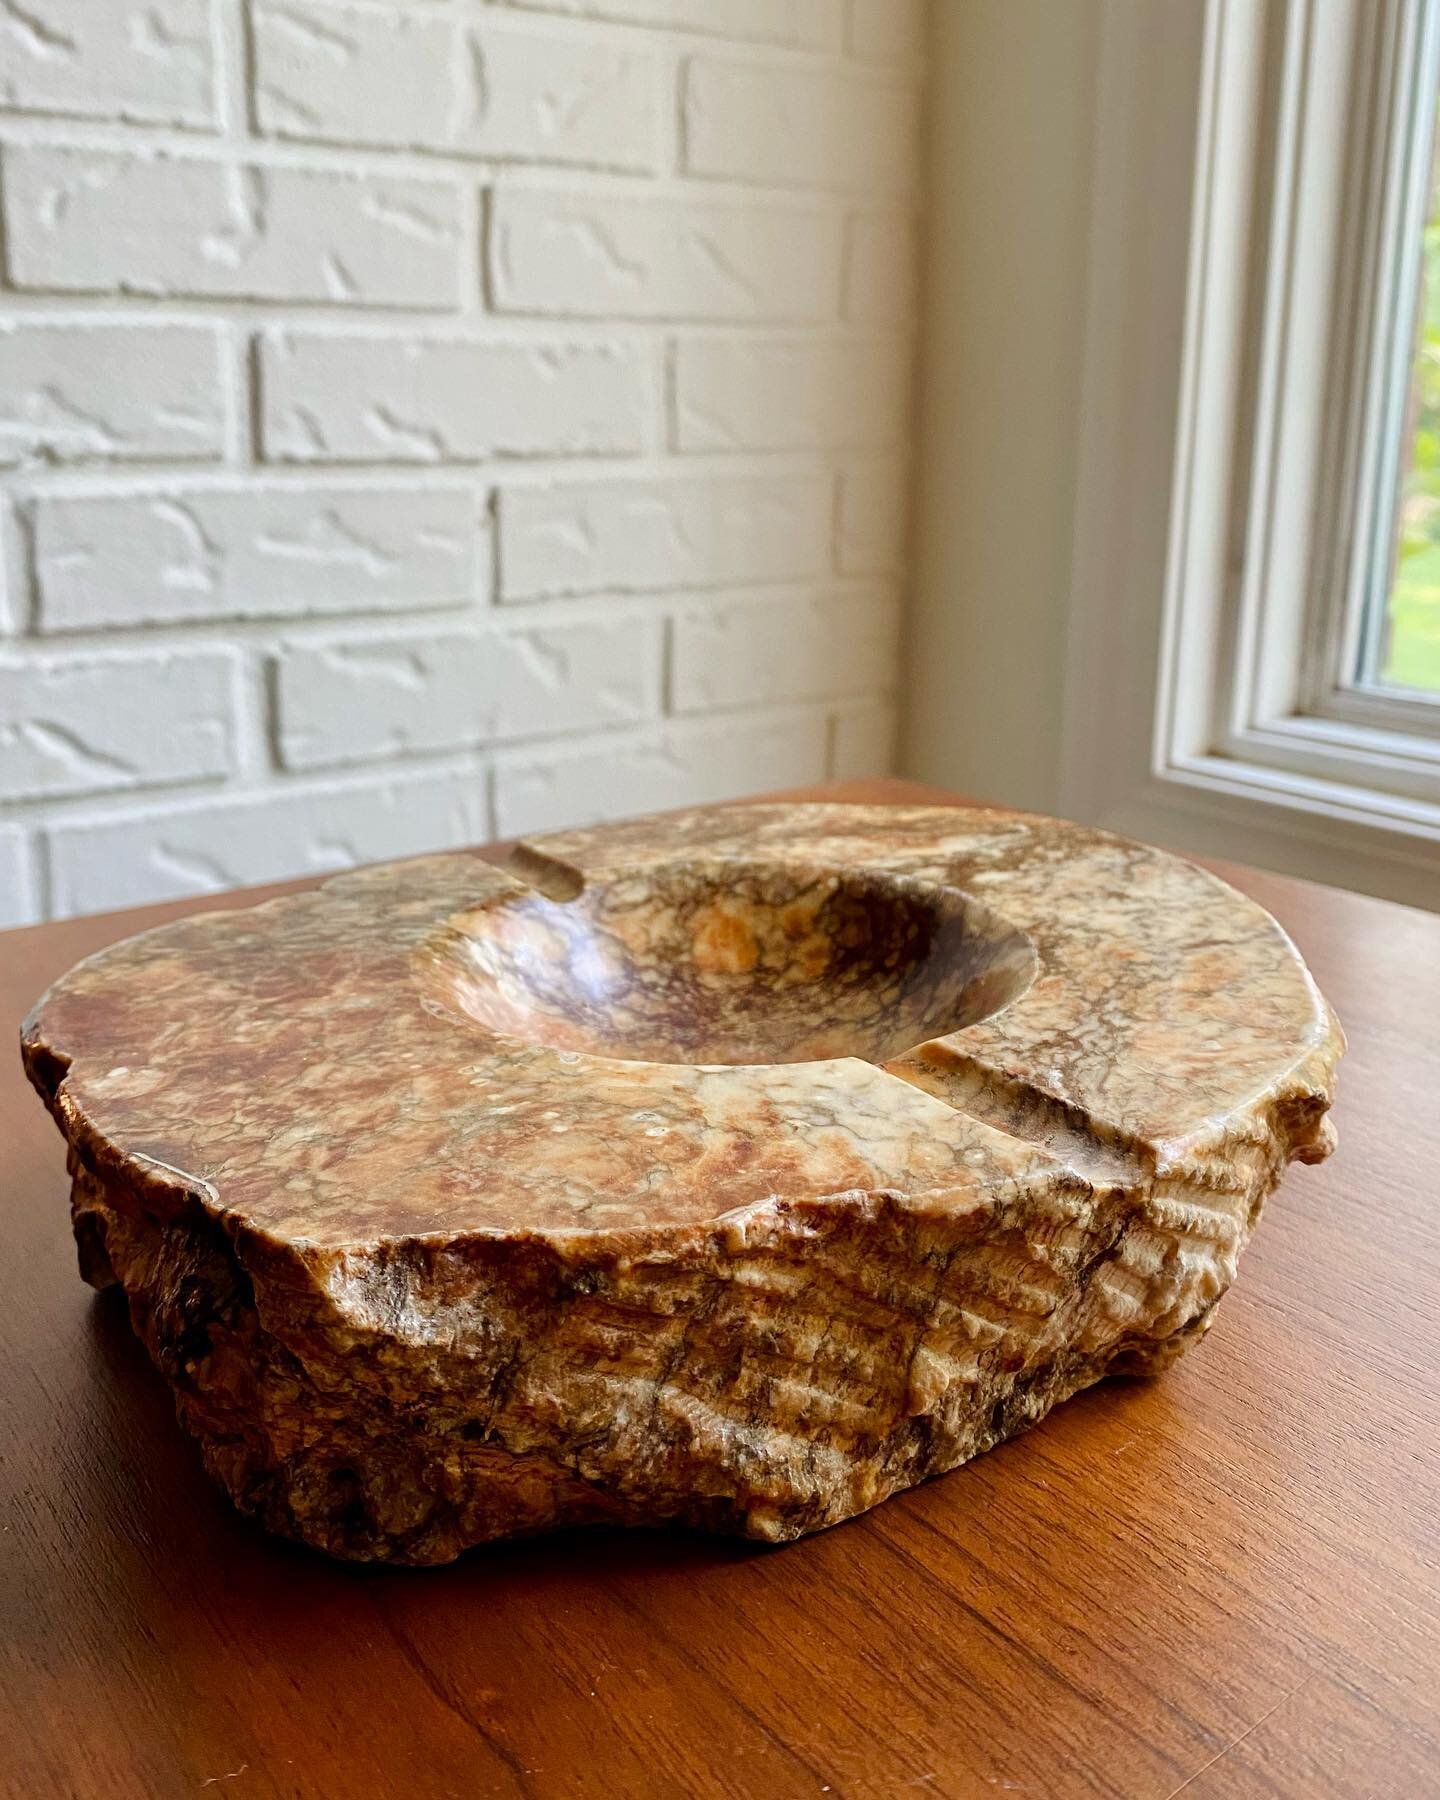 ✨FOR SALE:✨
Heavy onyx or granite (I&rsquo;m not a rockologist) sculptural ashtray. 
this is a really cool piece. That would look awesome on a coffee table or on a bookshelf on top of large books. or on your nightstand for putting your ring or earrin